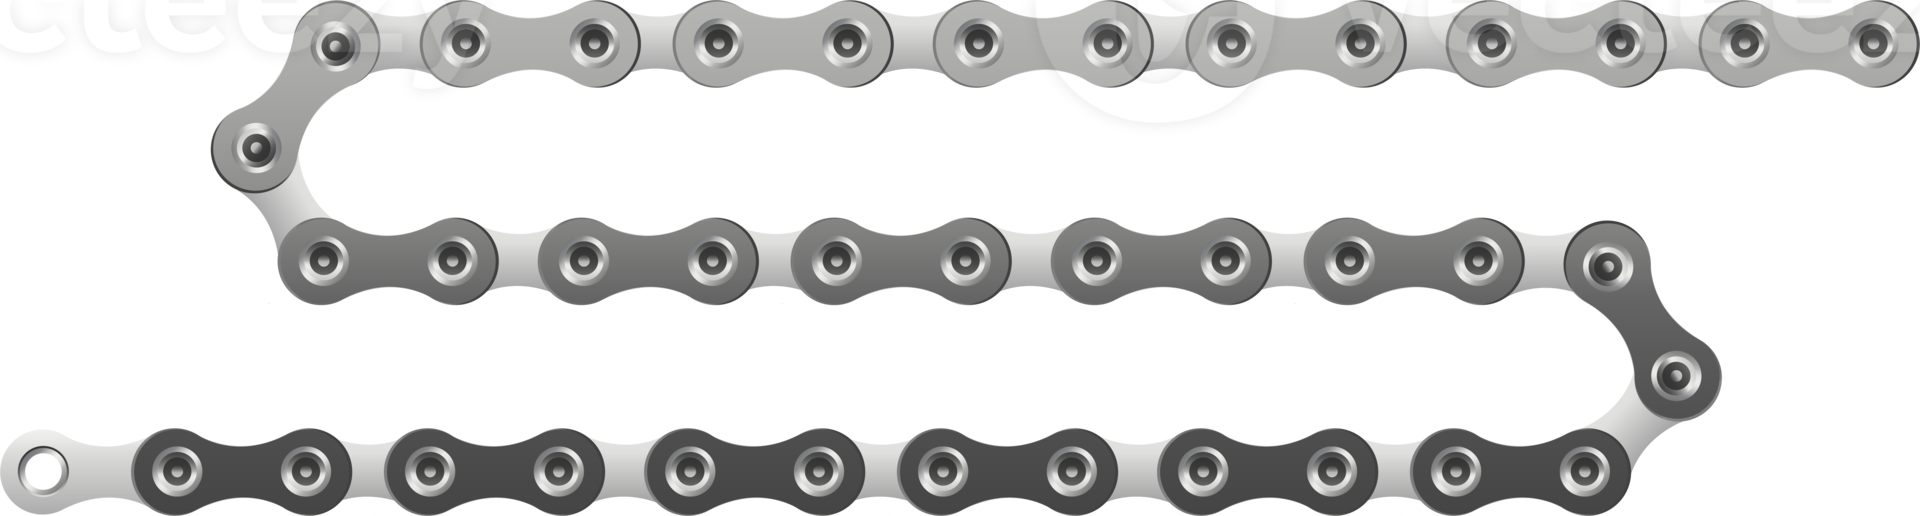 illustration, bicycle chain png